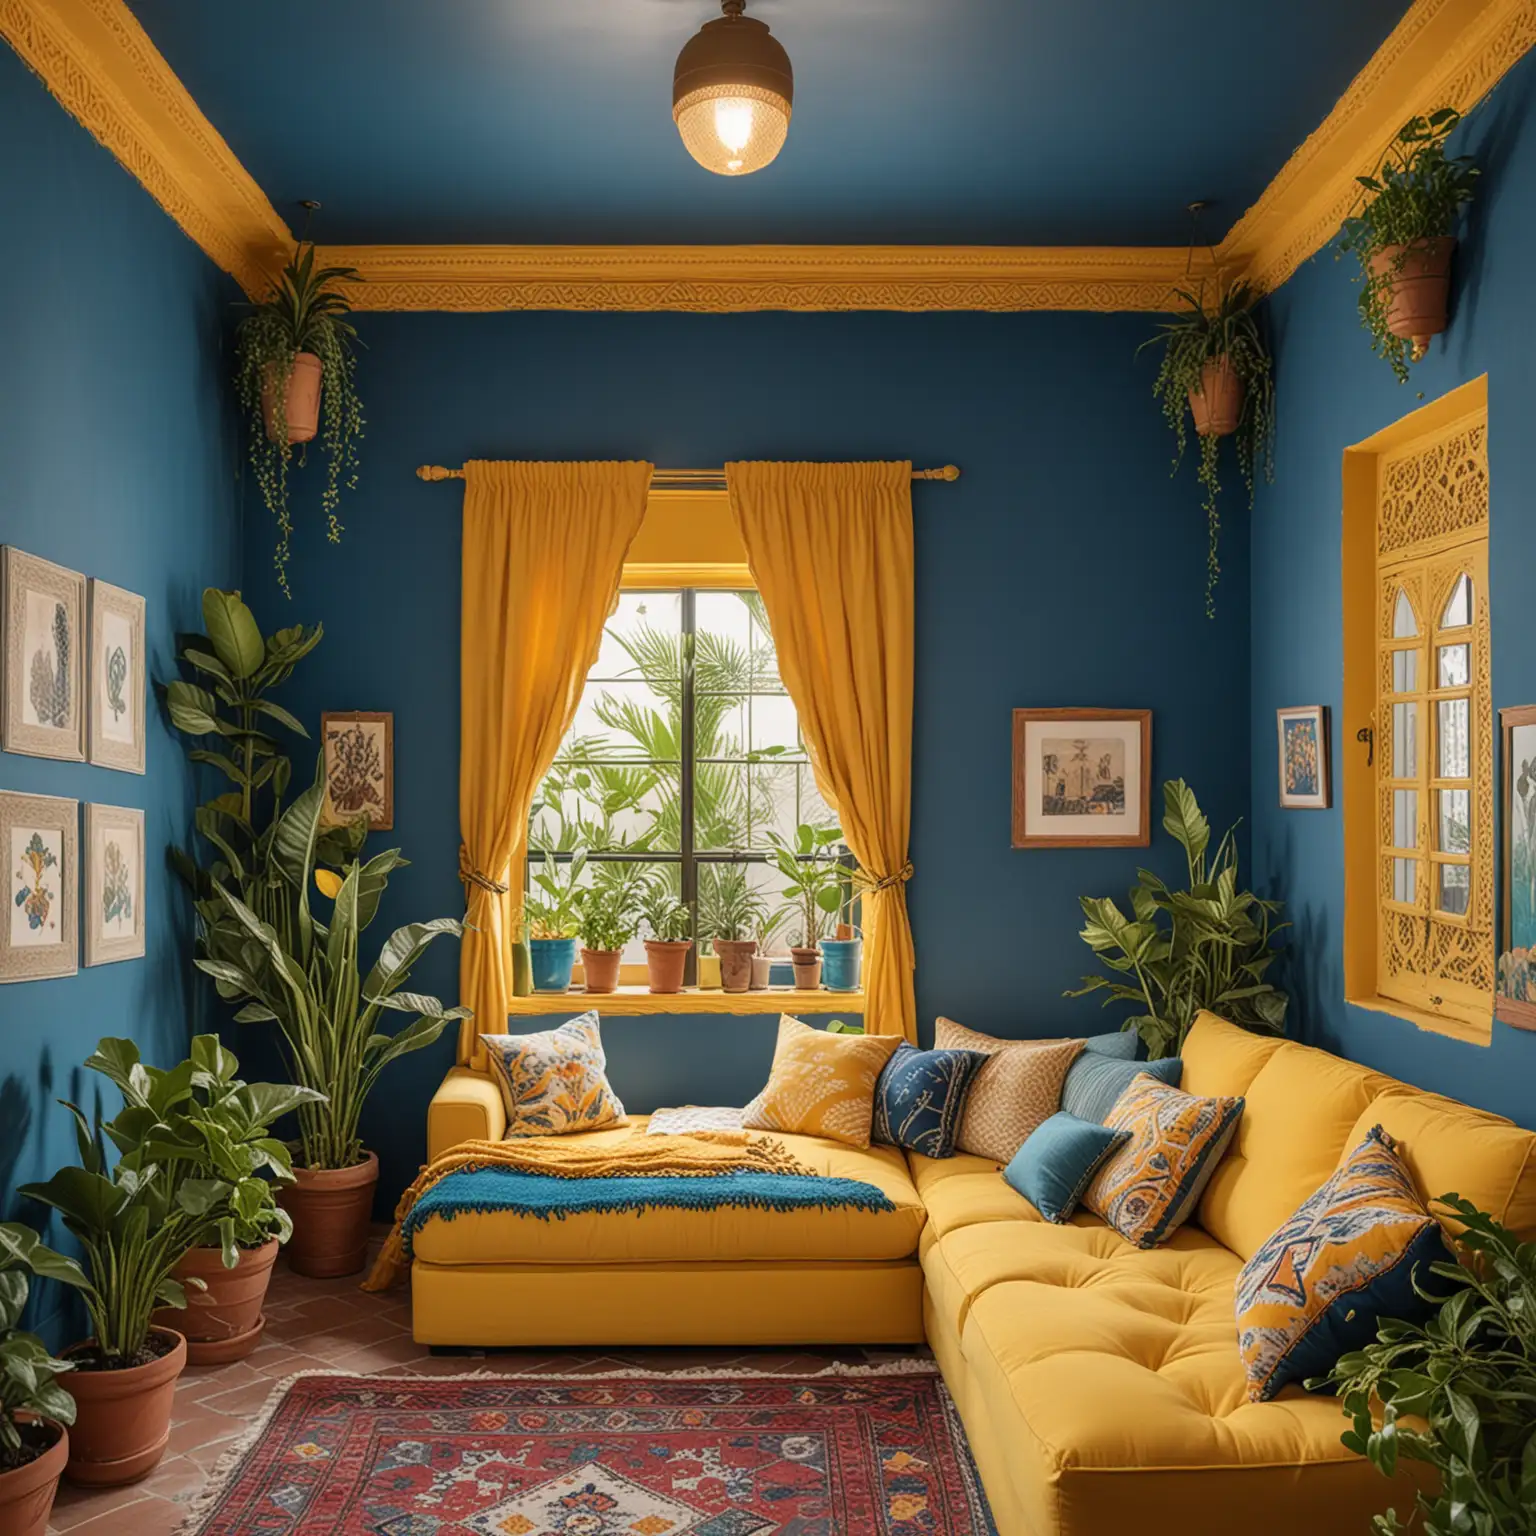 home theater small room, projector, one window, cozy, moroccan inspired, moroccan blue painted walls, yellow details in wall, cozy small sofa, artificial plants, cute paintings hanging on the walls.